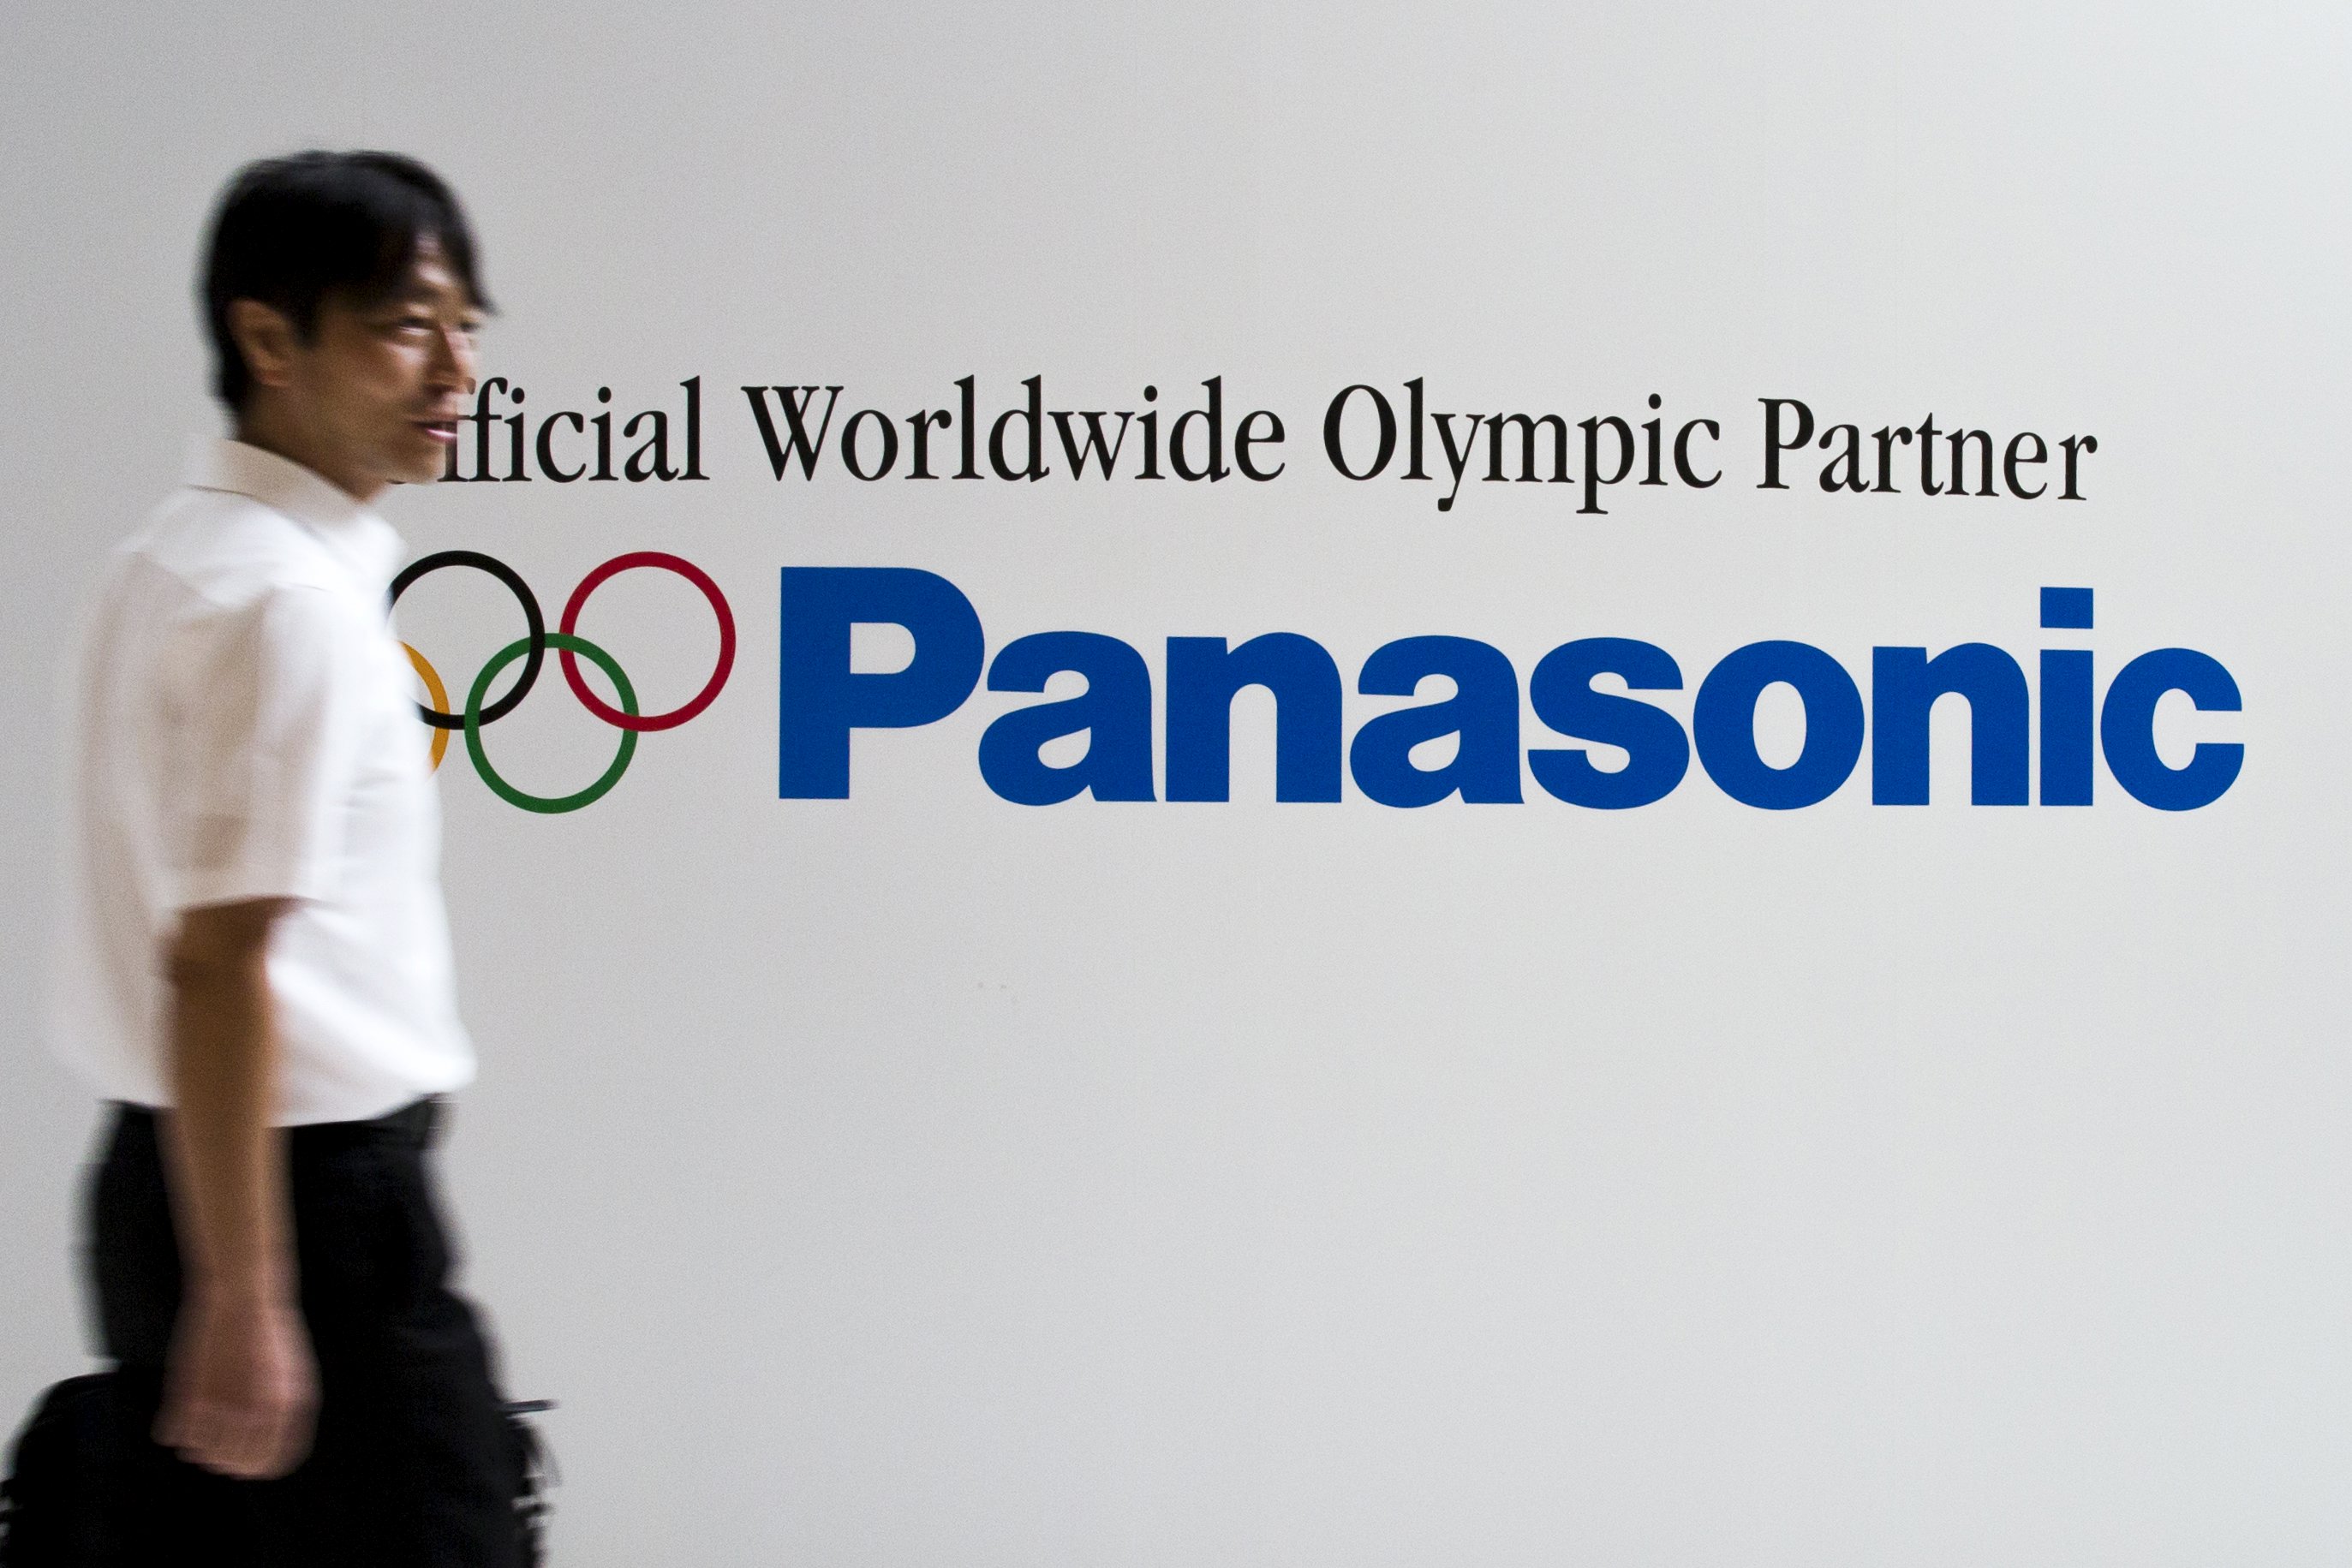 A man walks past the Panasonic logo at the Panasonic Centre in Tokyo July 29, 2015. Japan's Panasonic Corp on Wednesday booked a 7 percent fall in first-quarter operating profit, missing analyst estimates, attributing the decline to a change in reporting practices. Photo: Reuters